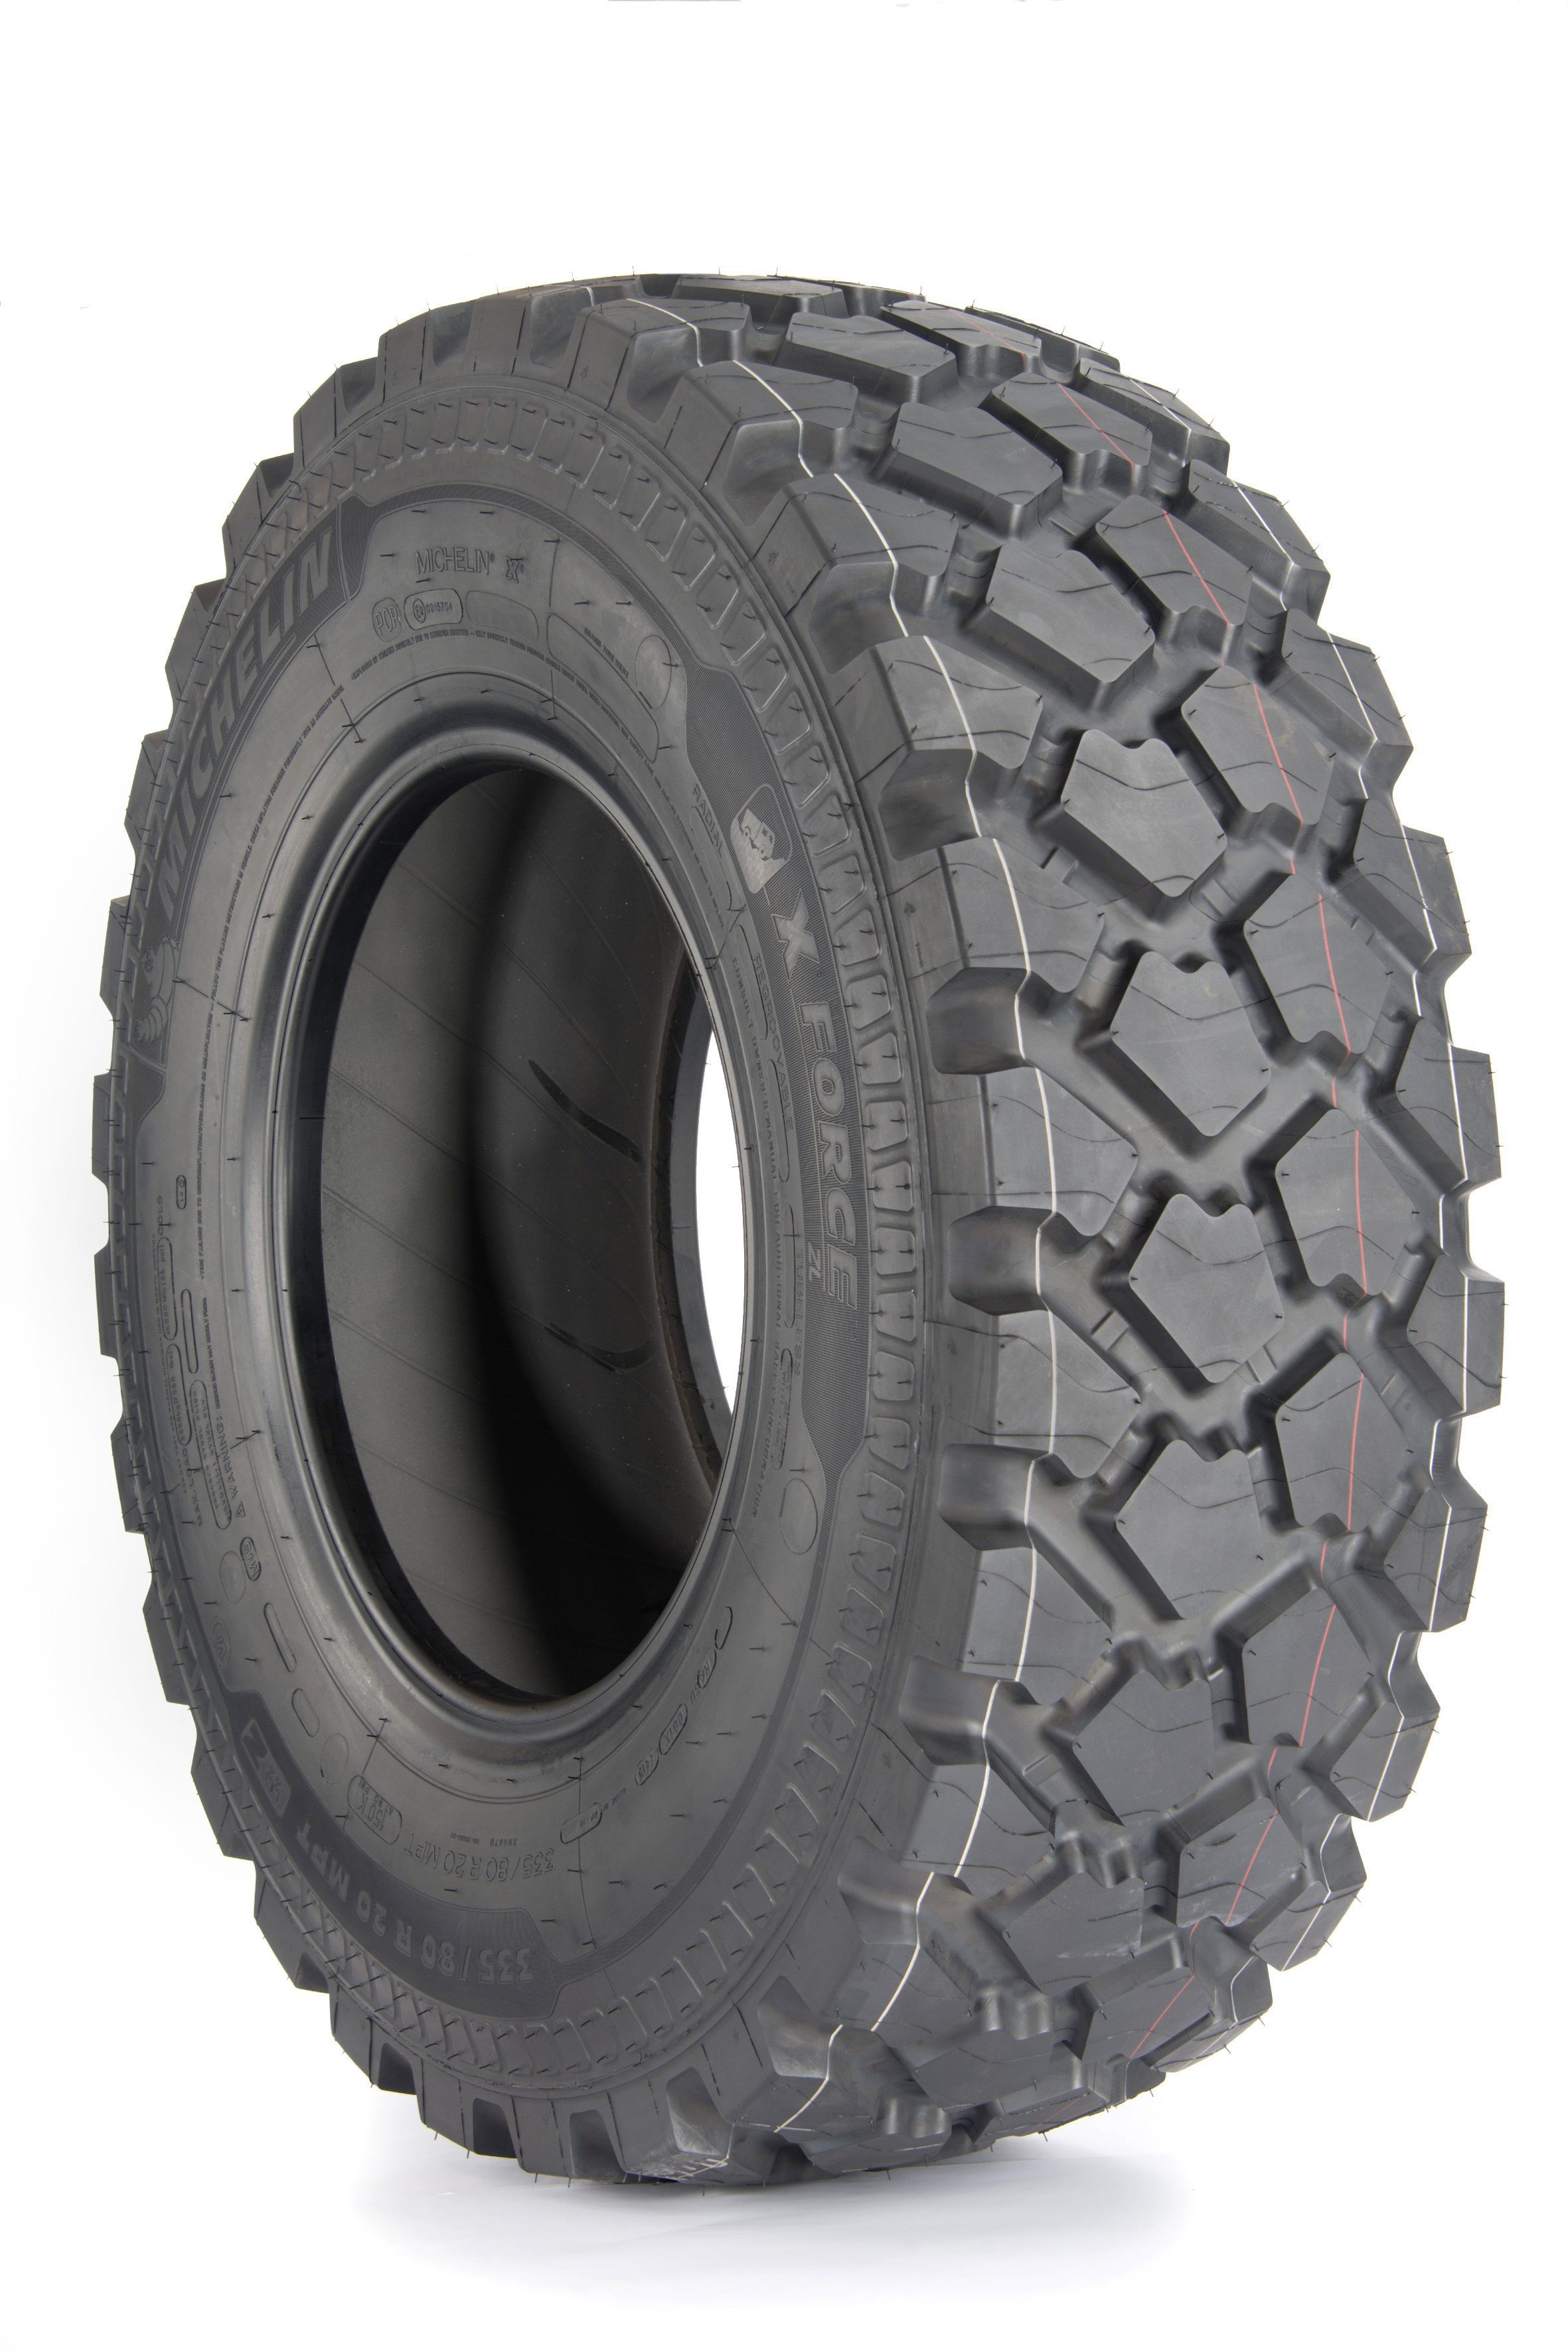 Michelin off-road X Force range expands with launch of X Force ZL -  Tyrepress